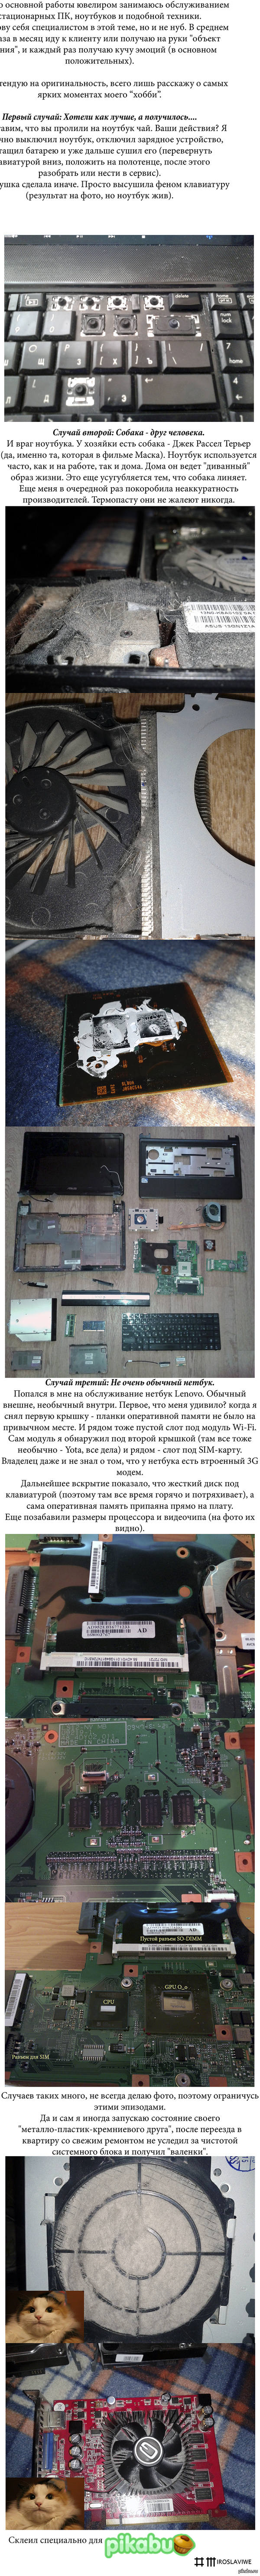 A little about laptops and their rich inner world - My, Notebook, Repair, Longpost, The photo